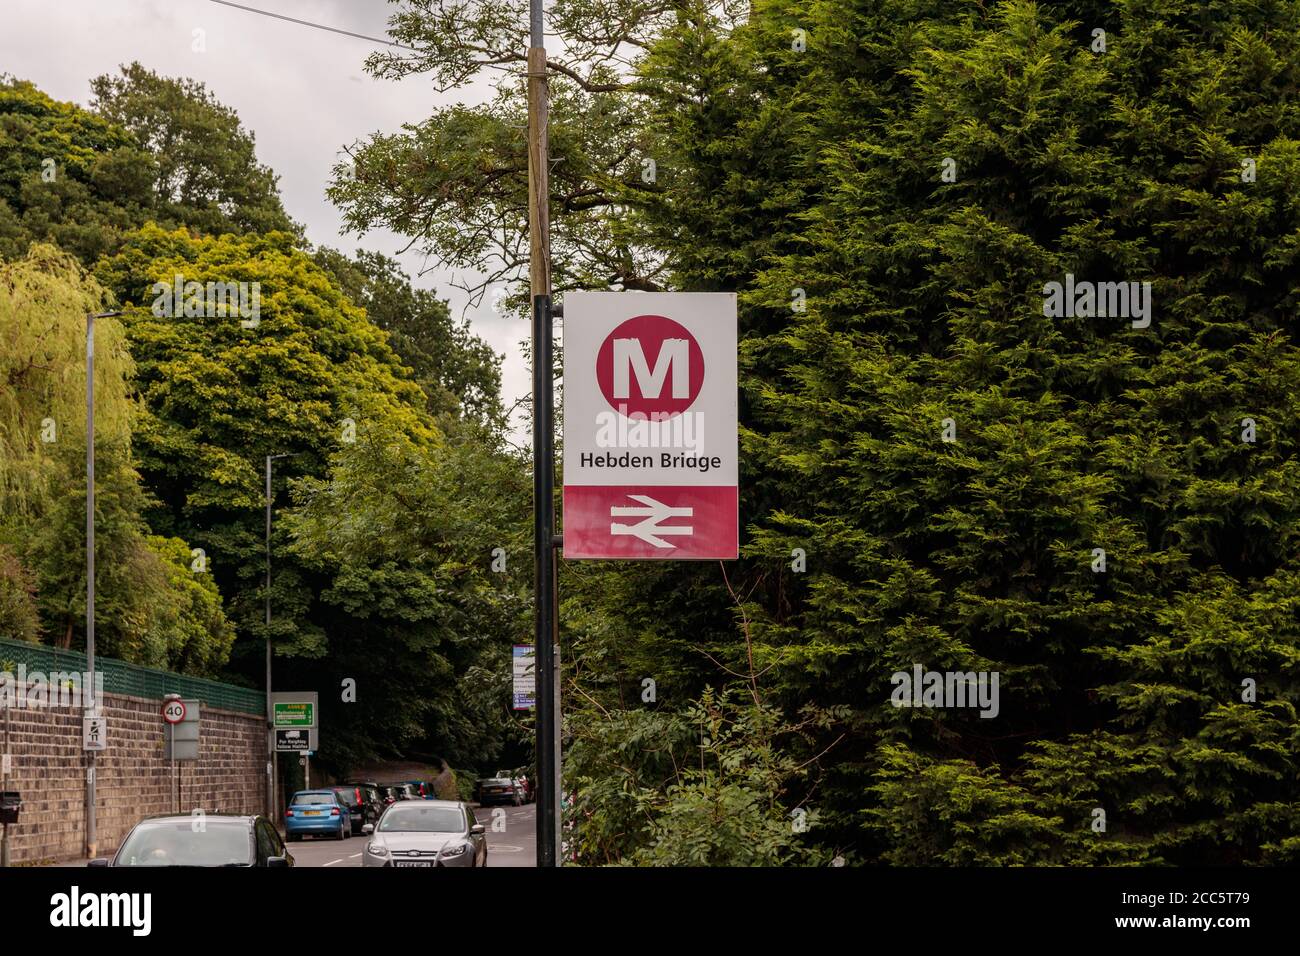 View of the Hebden Bridge train station sign Stock Photo